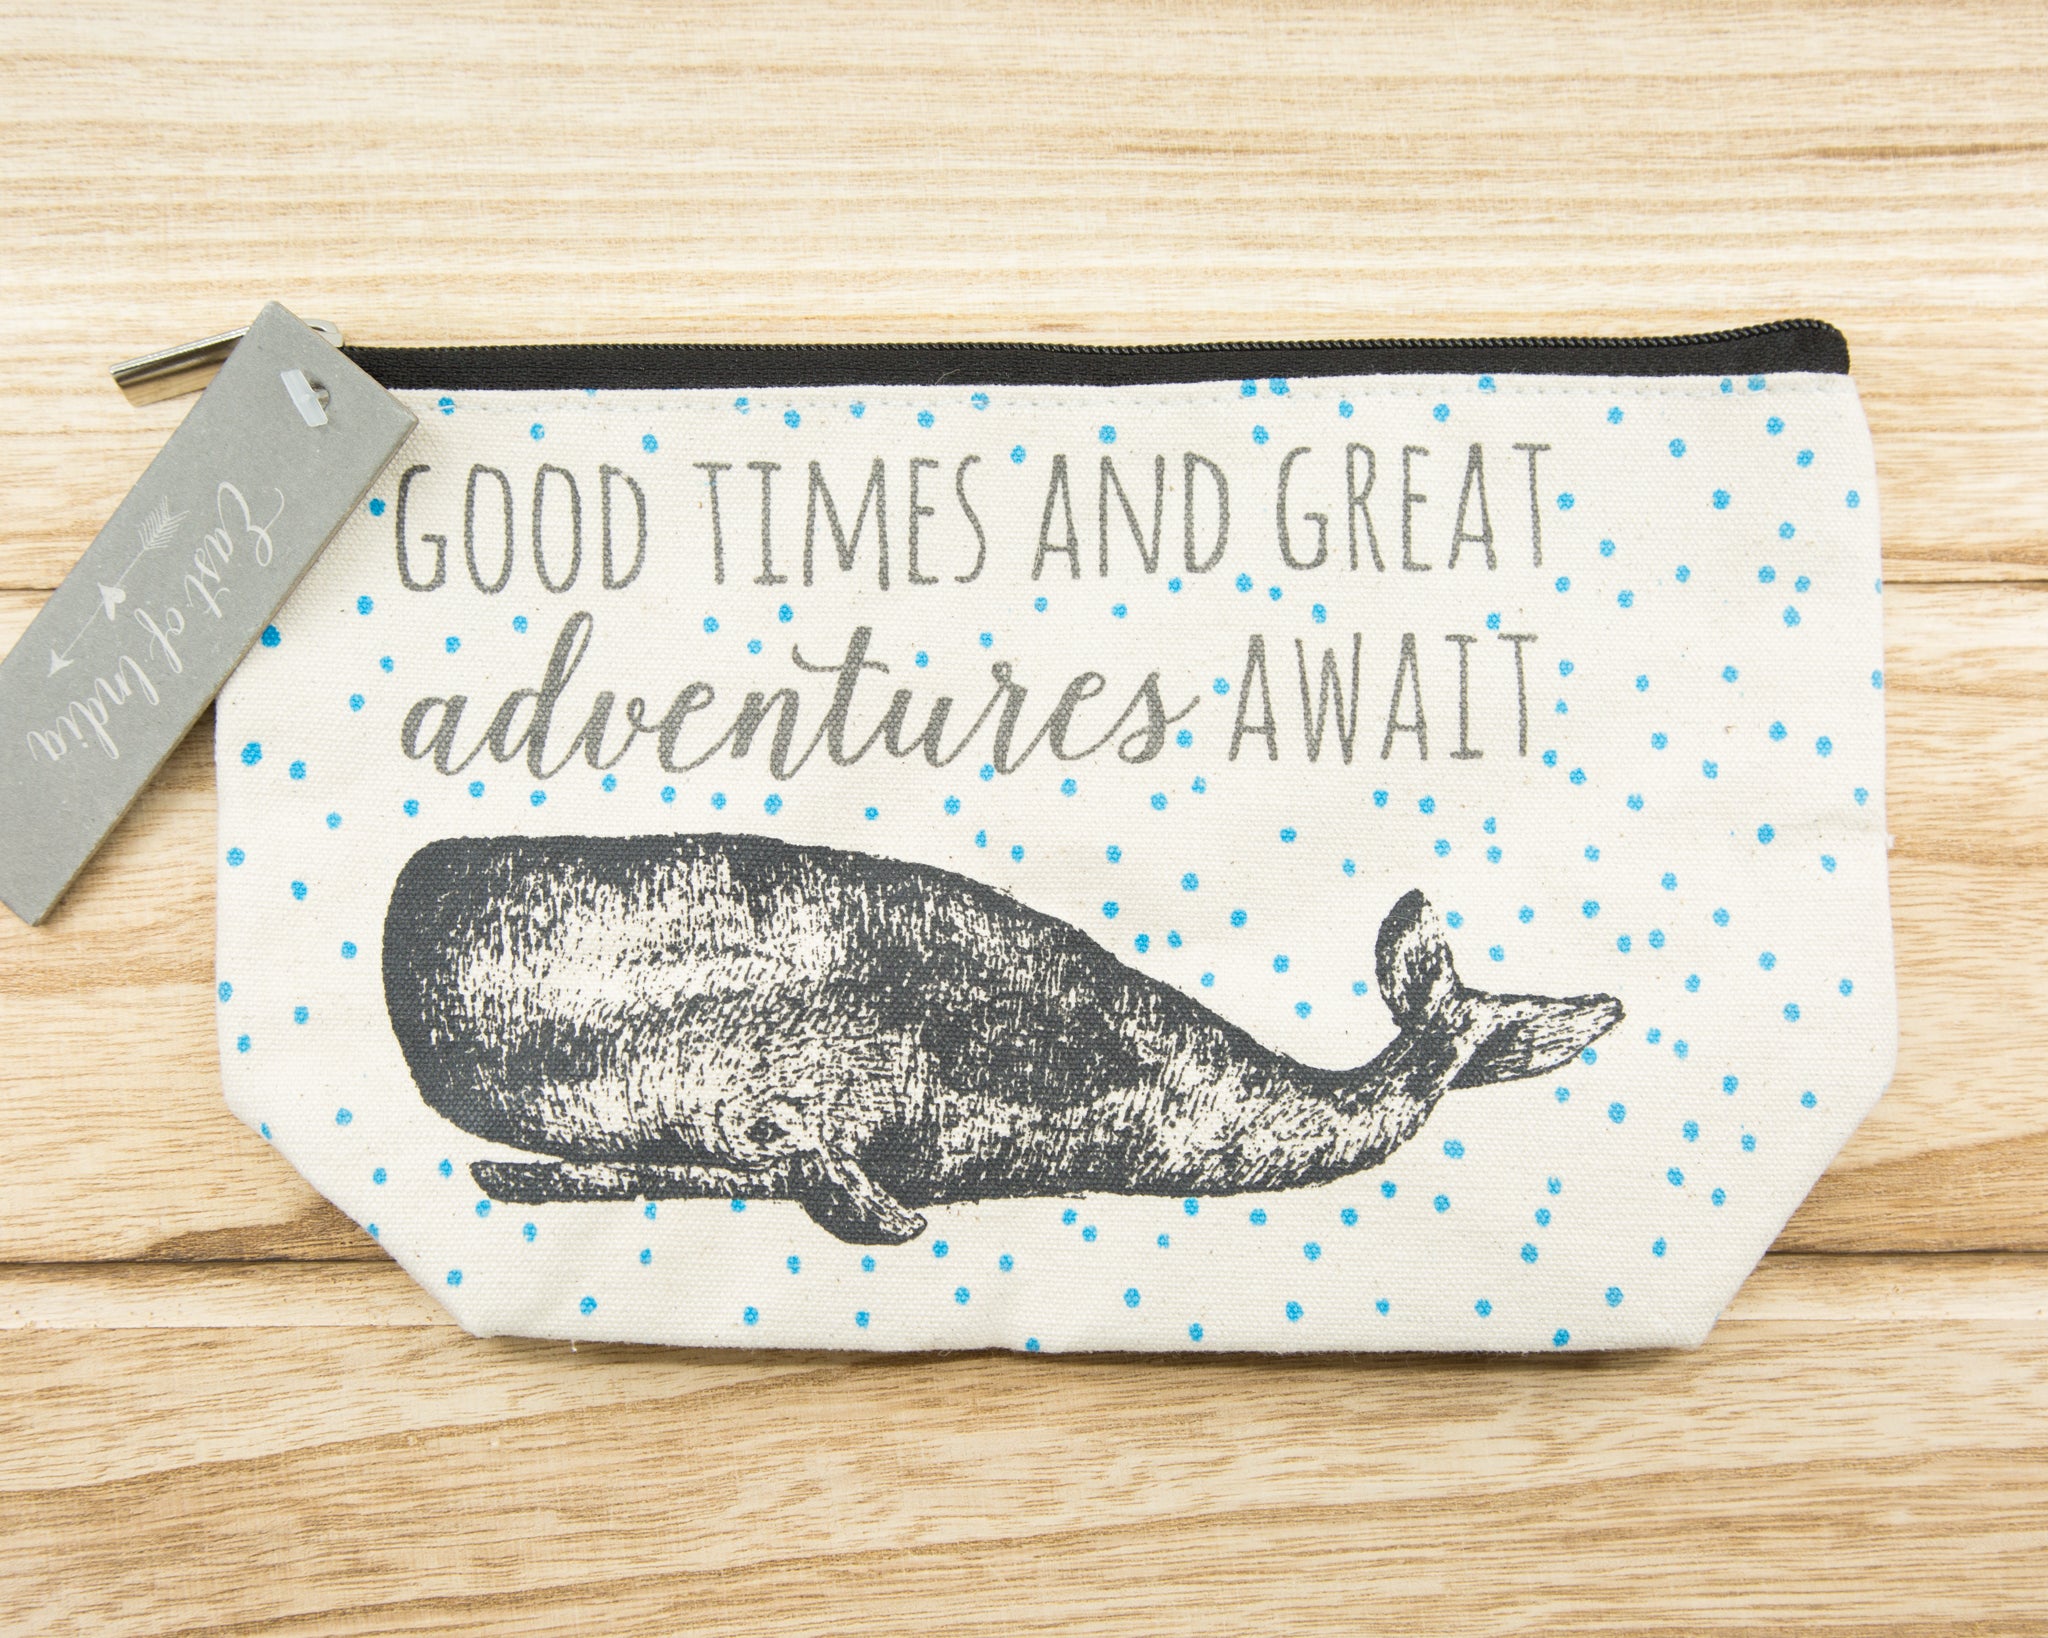 Good times & great adventures await - Canvas Cosmetic Bag